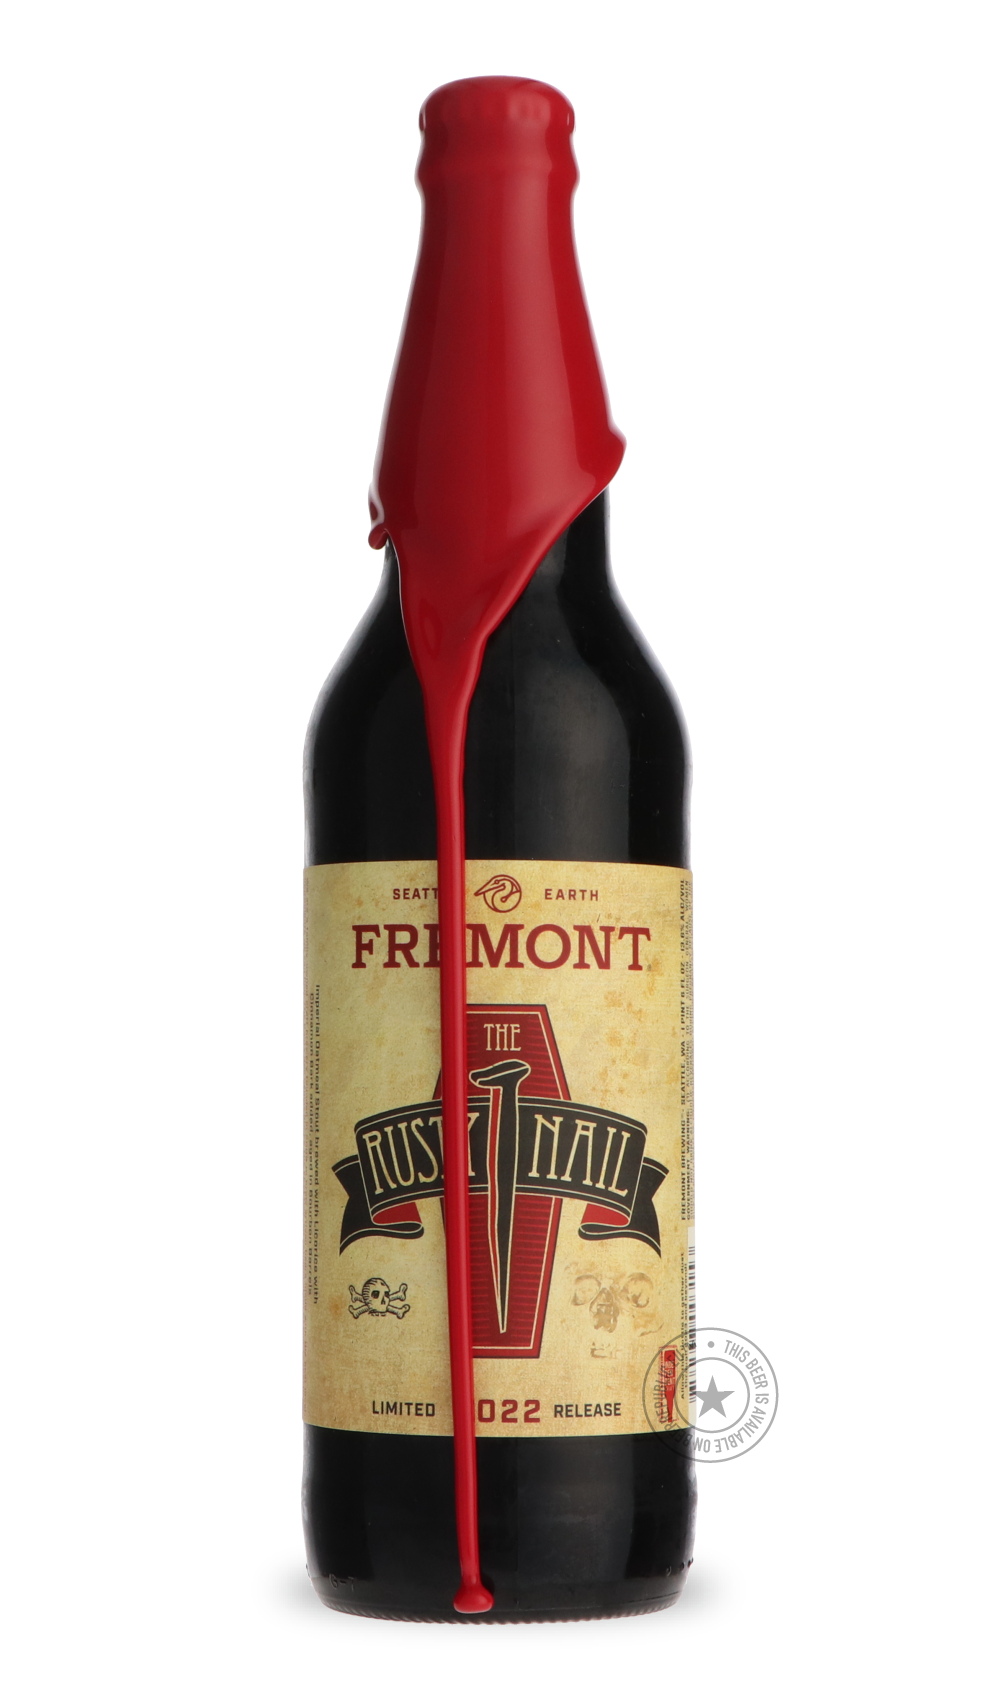 -Fremont- The Rusty Nail-Stout & Porter- Only @ Beer Republic - The best online beer store for American & Canadian craft beer - Buy beer online from the USA and Canada - Bier online kopen - Amerikaans bier kopen - Craft beer store - Craft beer kopen - Amerikanisch bier kaufen - Bier online kaufen - Acheter biere online - IPA - Stout - Porter - New England IPA - Hazy IPA - Imperial Stout - Barrel Aged - Barrel Aged Imperial Stout - Brown - Dark beer - Blond - Blonde - Pilsner - Lager - Wheat - Weizen - Amber